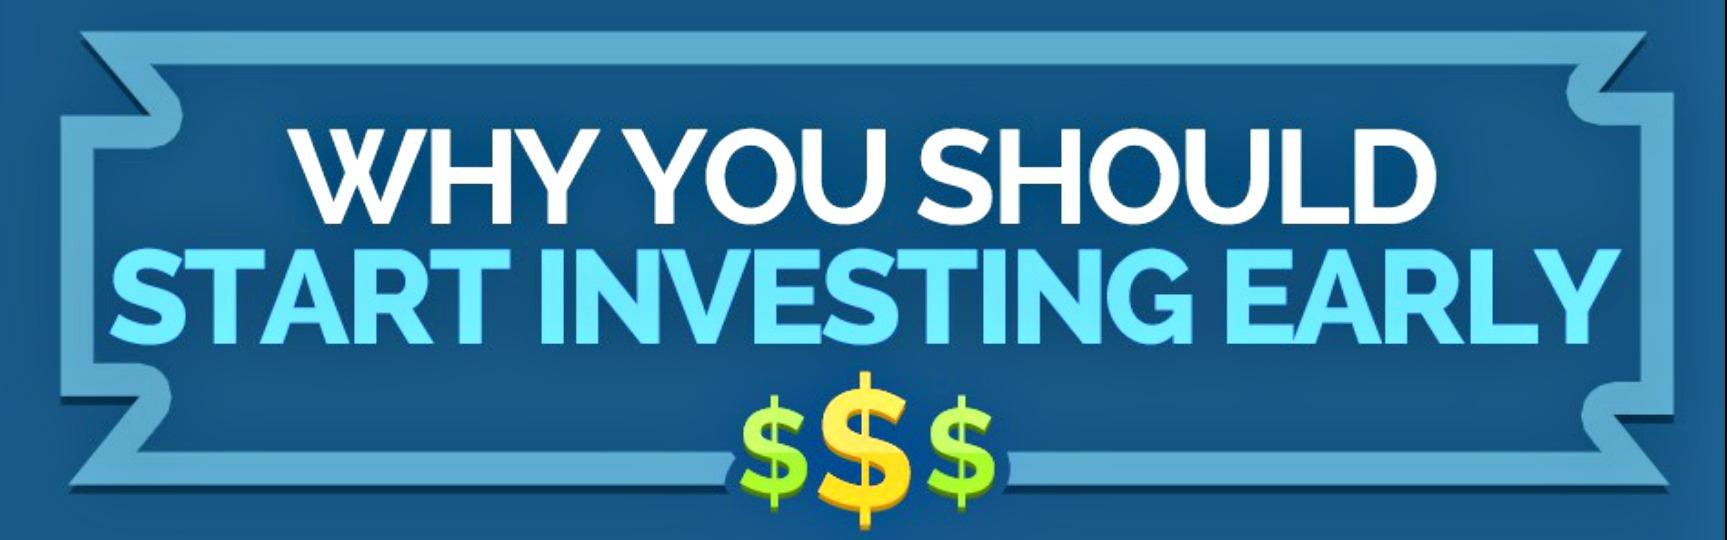 Why You Should Start Investing As Early As Possible [Infographic]